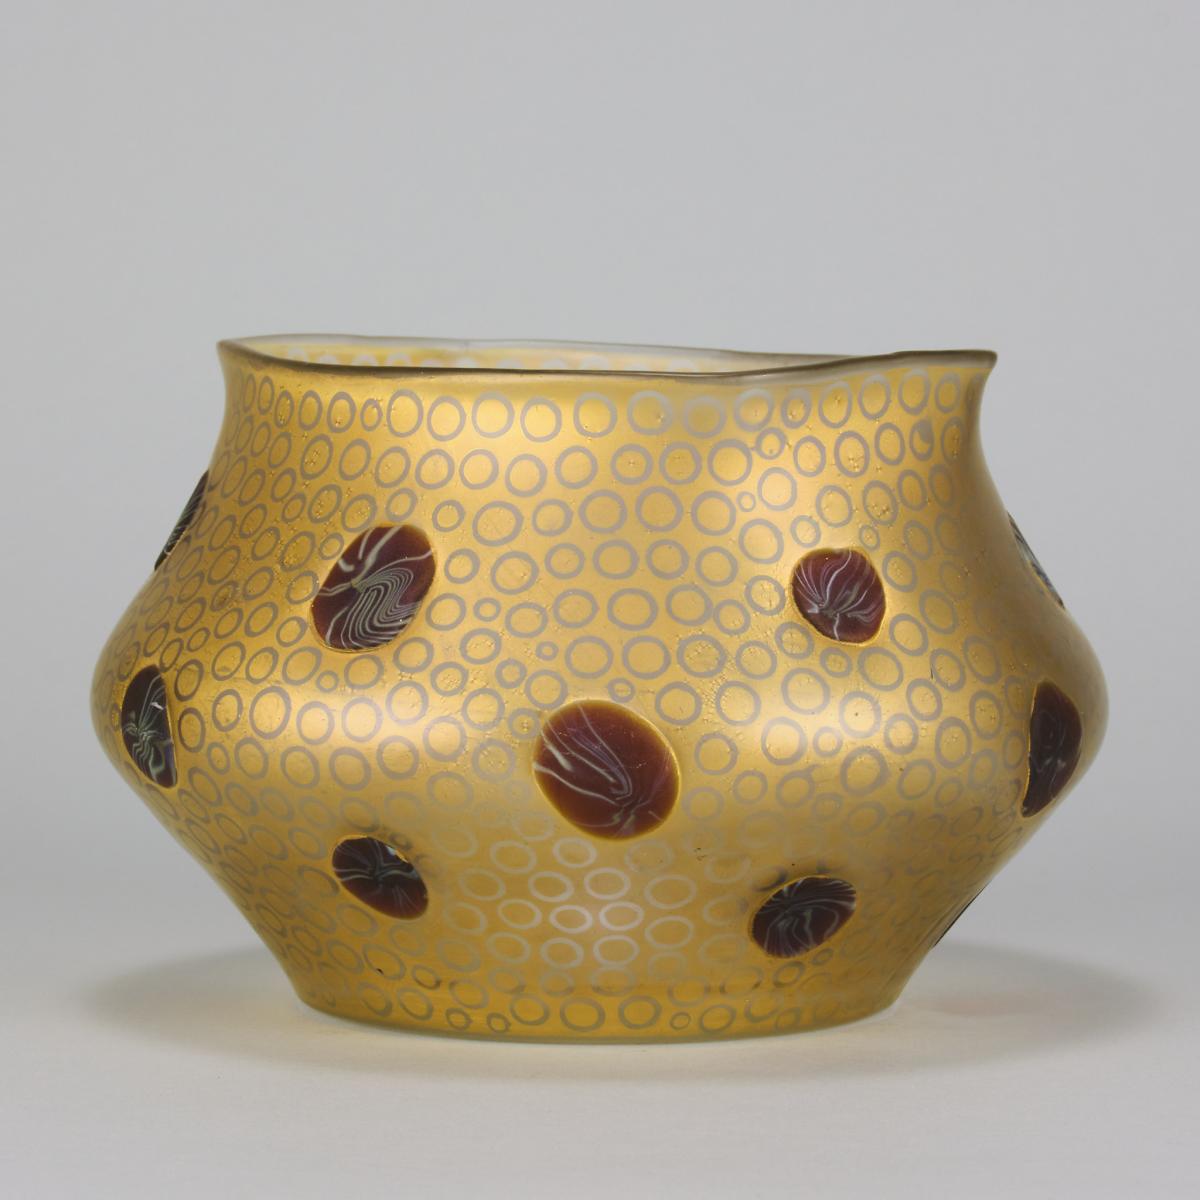 Early 20th Century Vase Entitled "Secessionist Vase" by Loetz Witwe